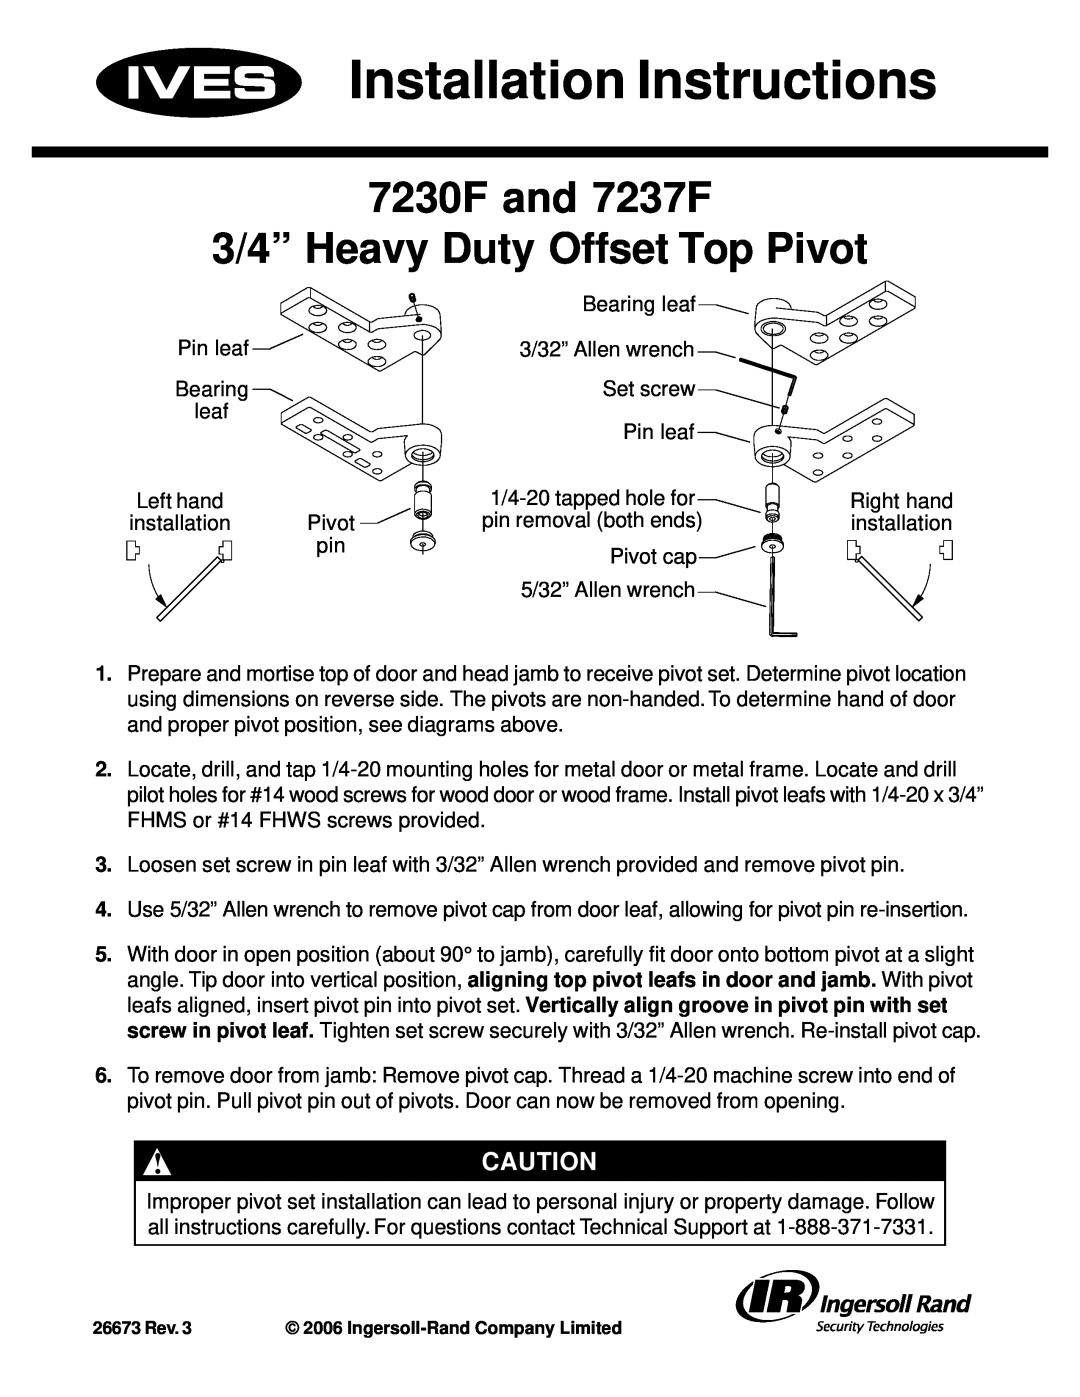 Ives installation instructions Installation Instructions, 7230F and 7237F 3/4” Heavy Duty Offset Top Pivot 